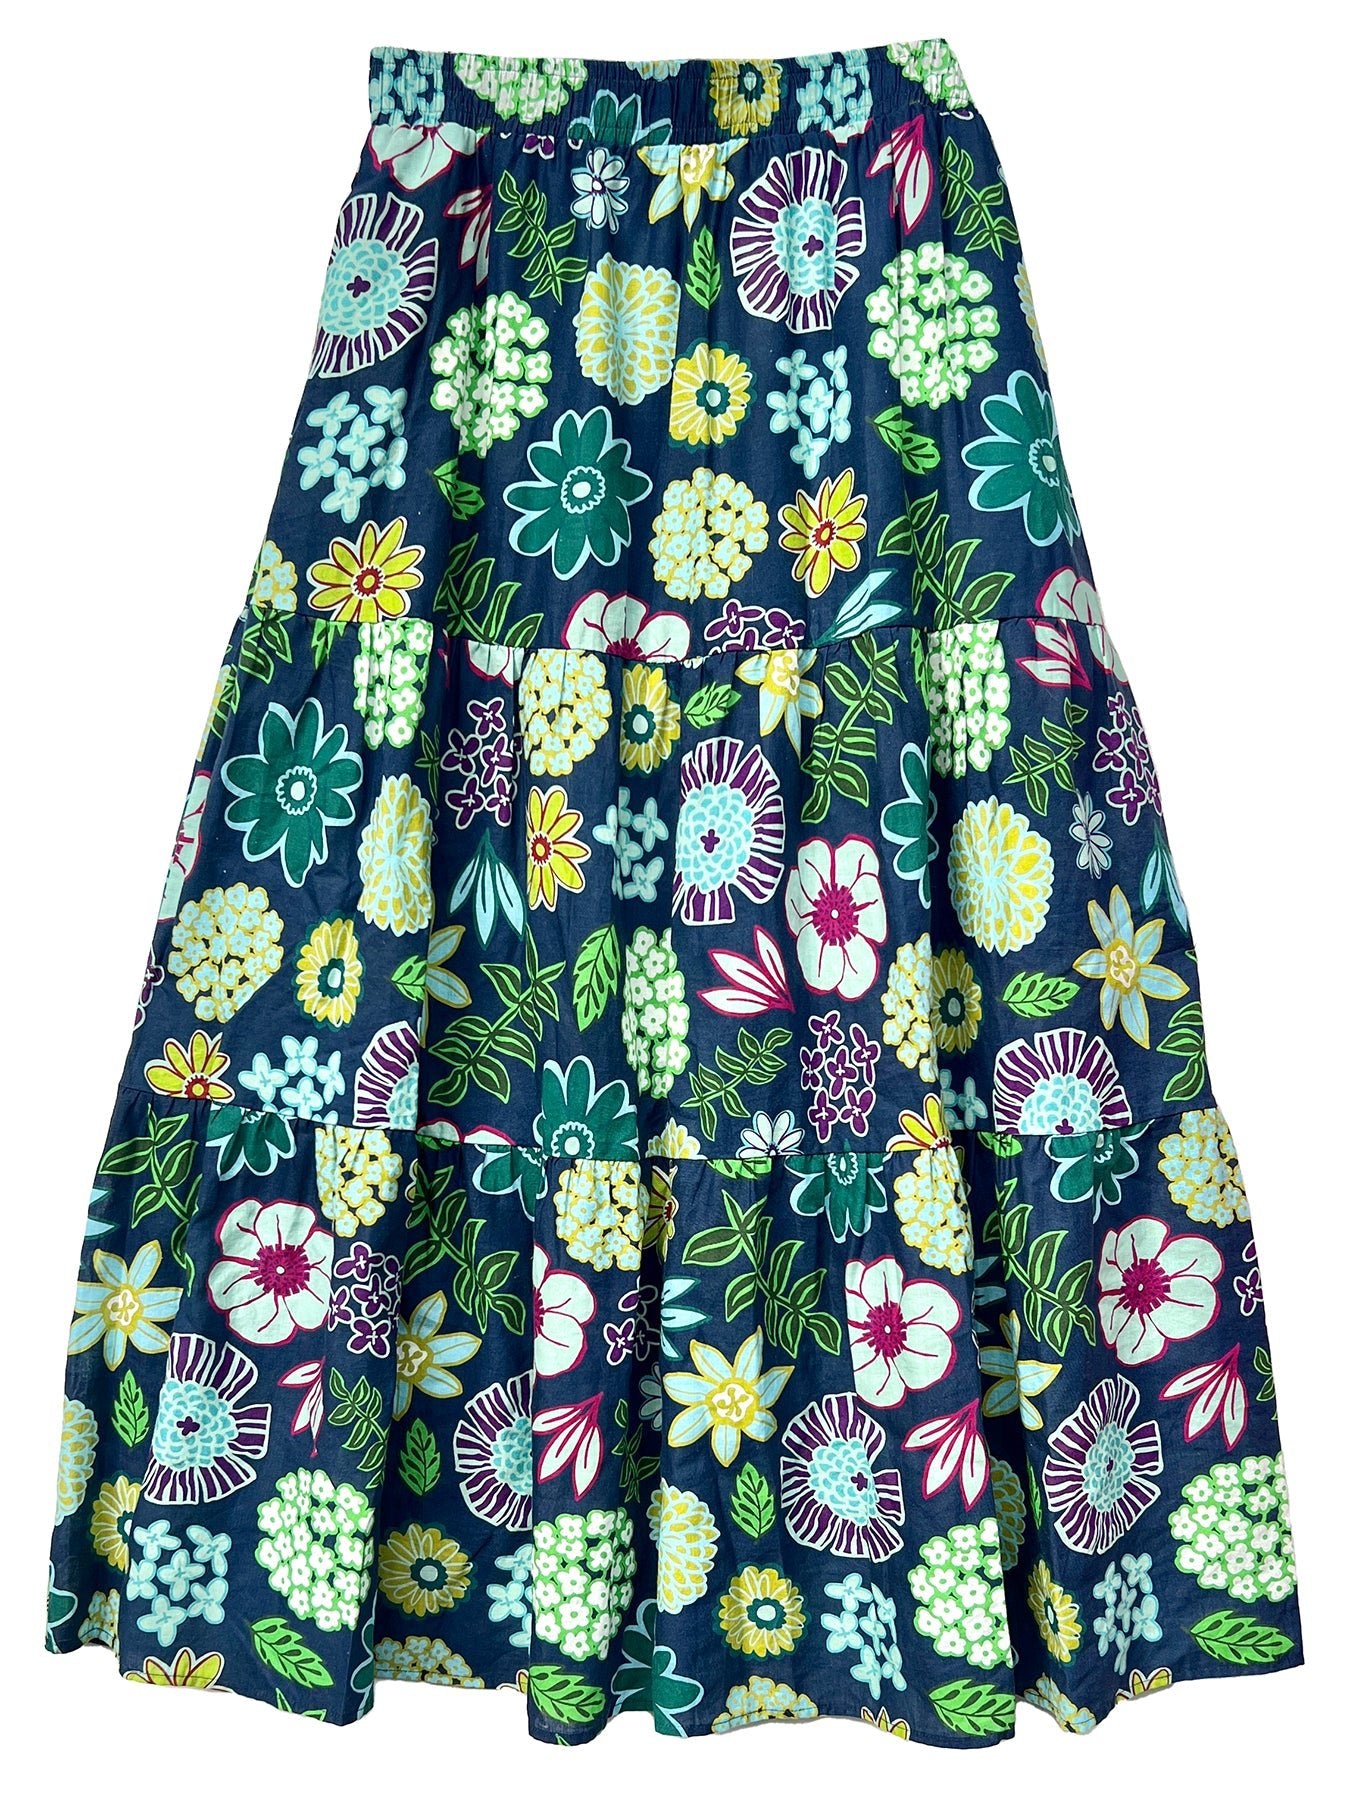 CLAUDIA maxi skirt Dazzle Flower Navy - Lesley Evers-Shop-Shop/All Products-Shop/Separates